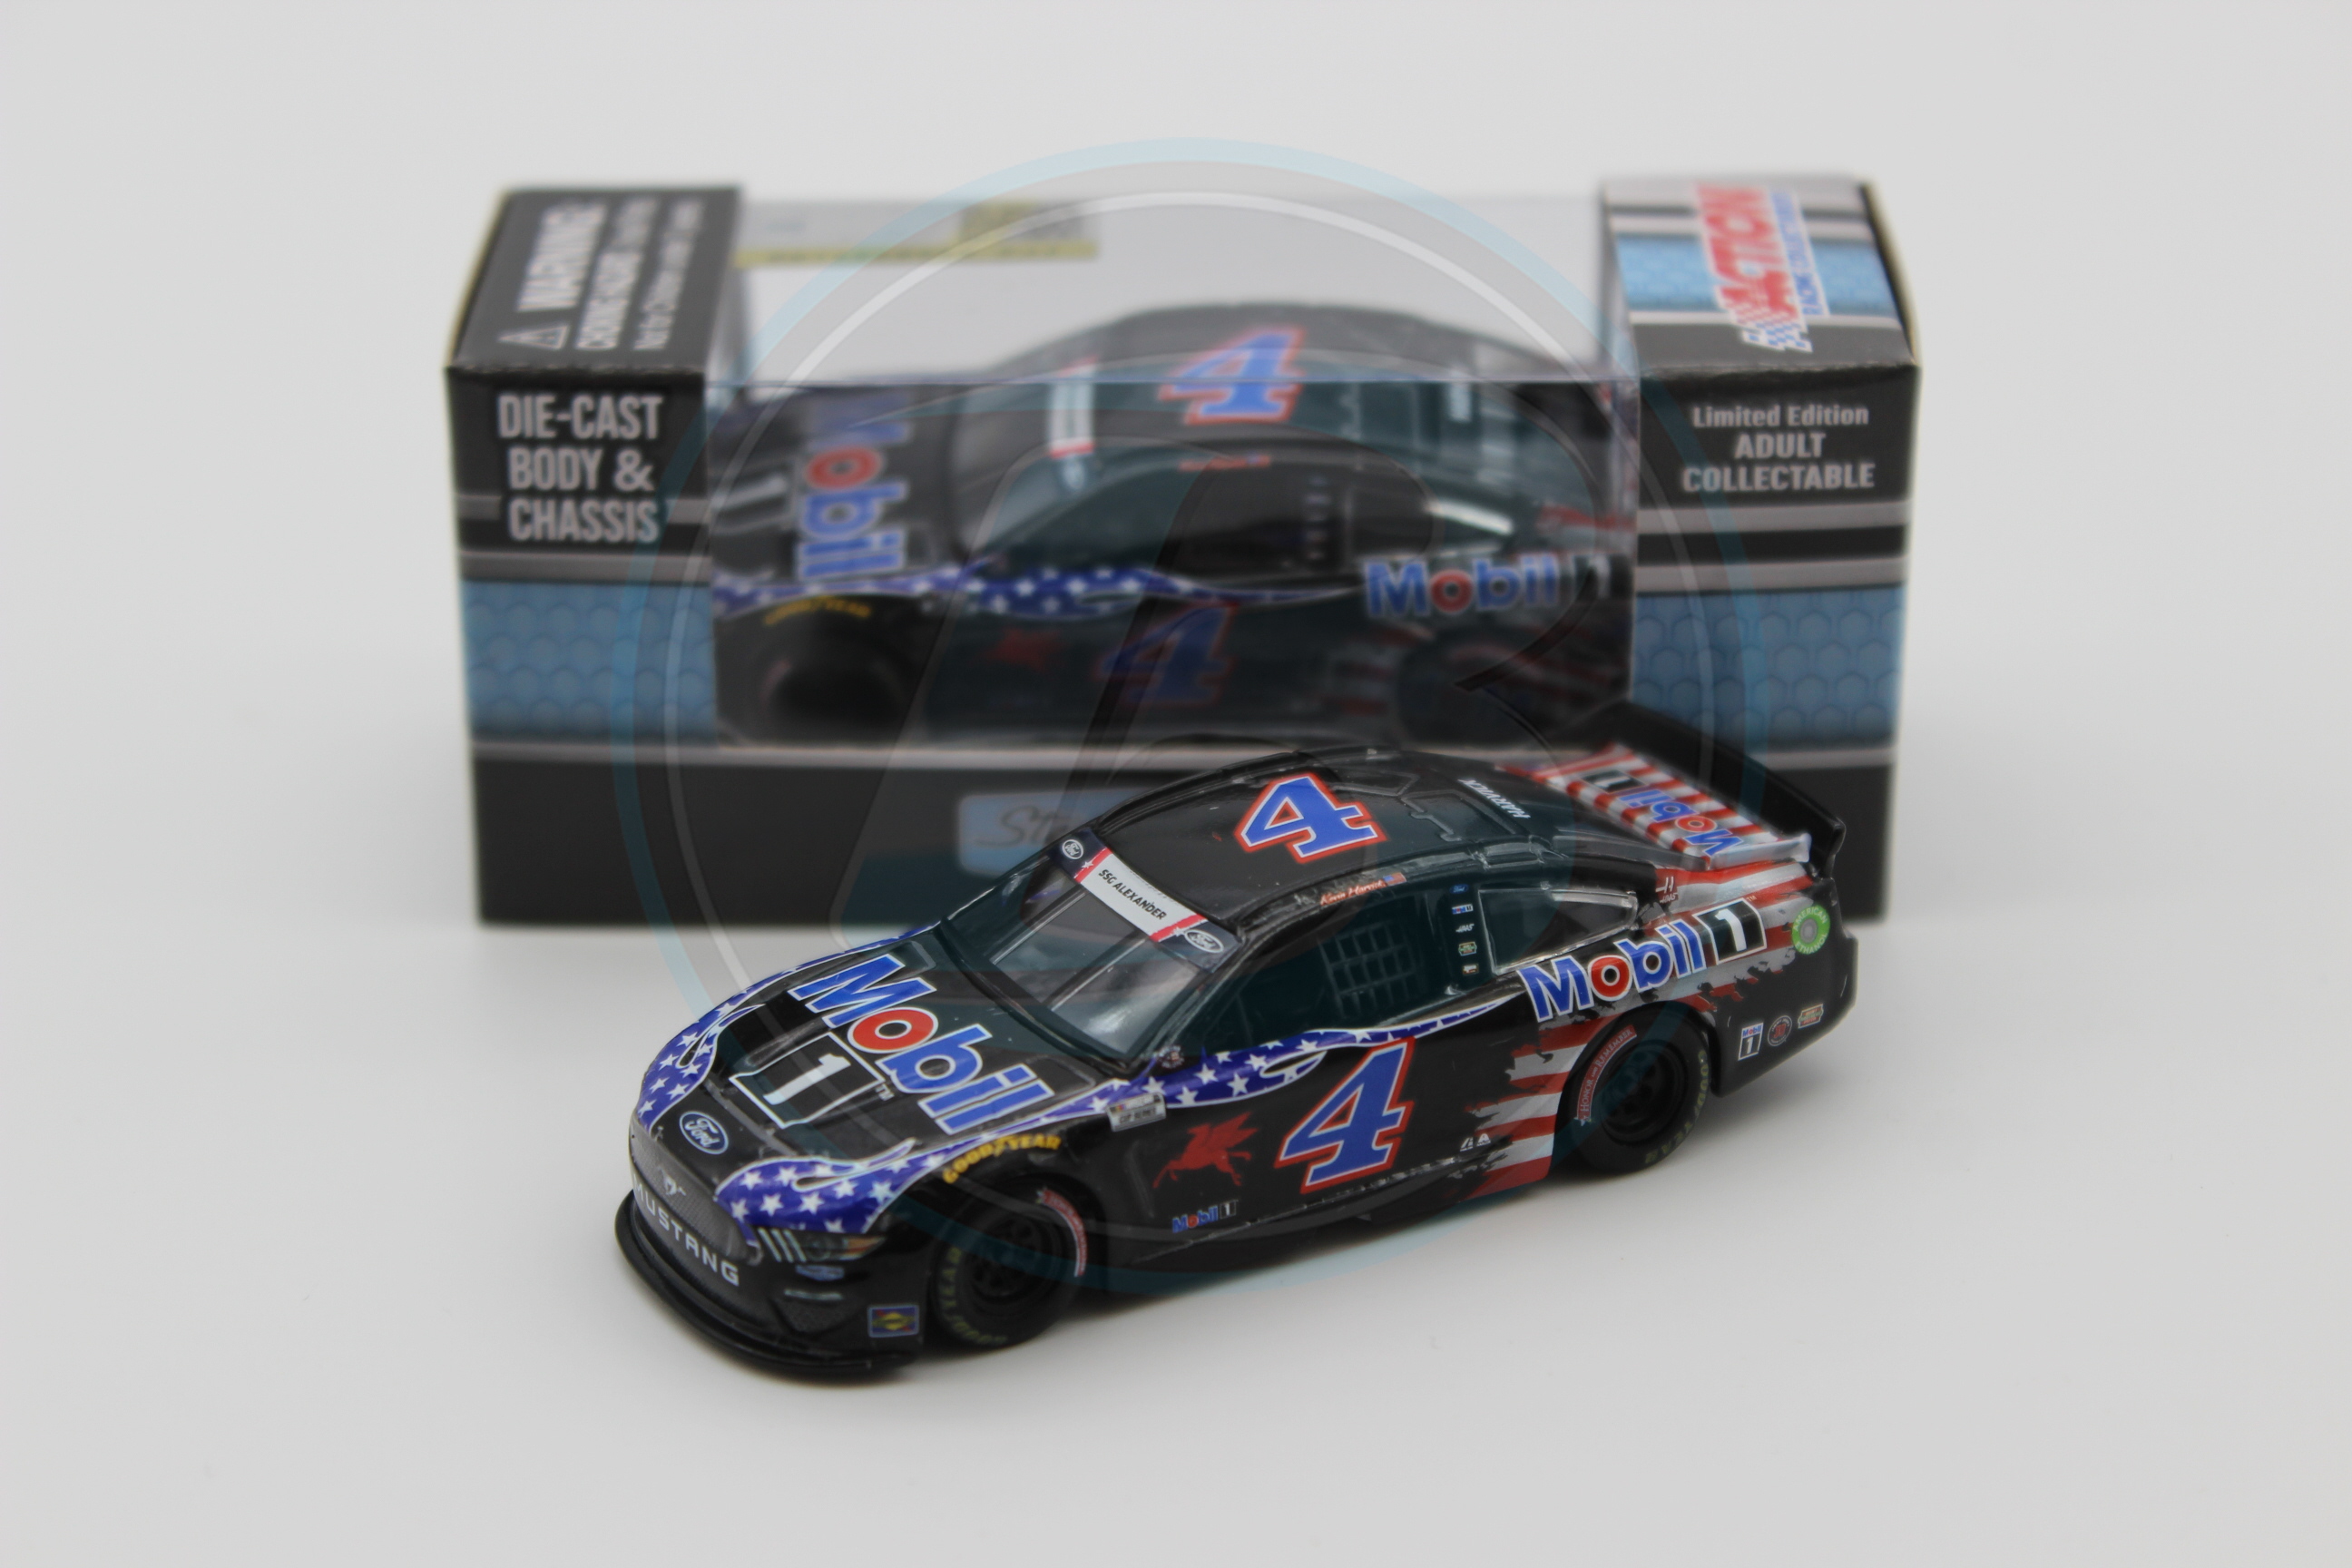 Kevin Harvick 2021 Mobil 1 1:64 Nascar Diecast W/ Diecast Chassis Rubber Tires 